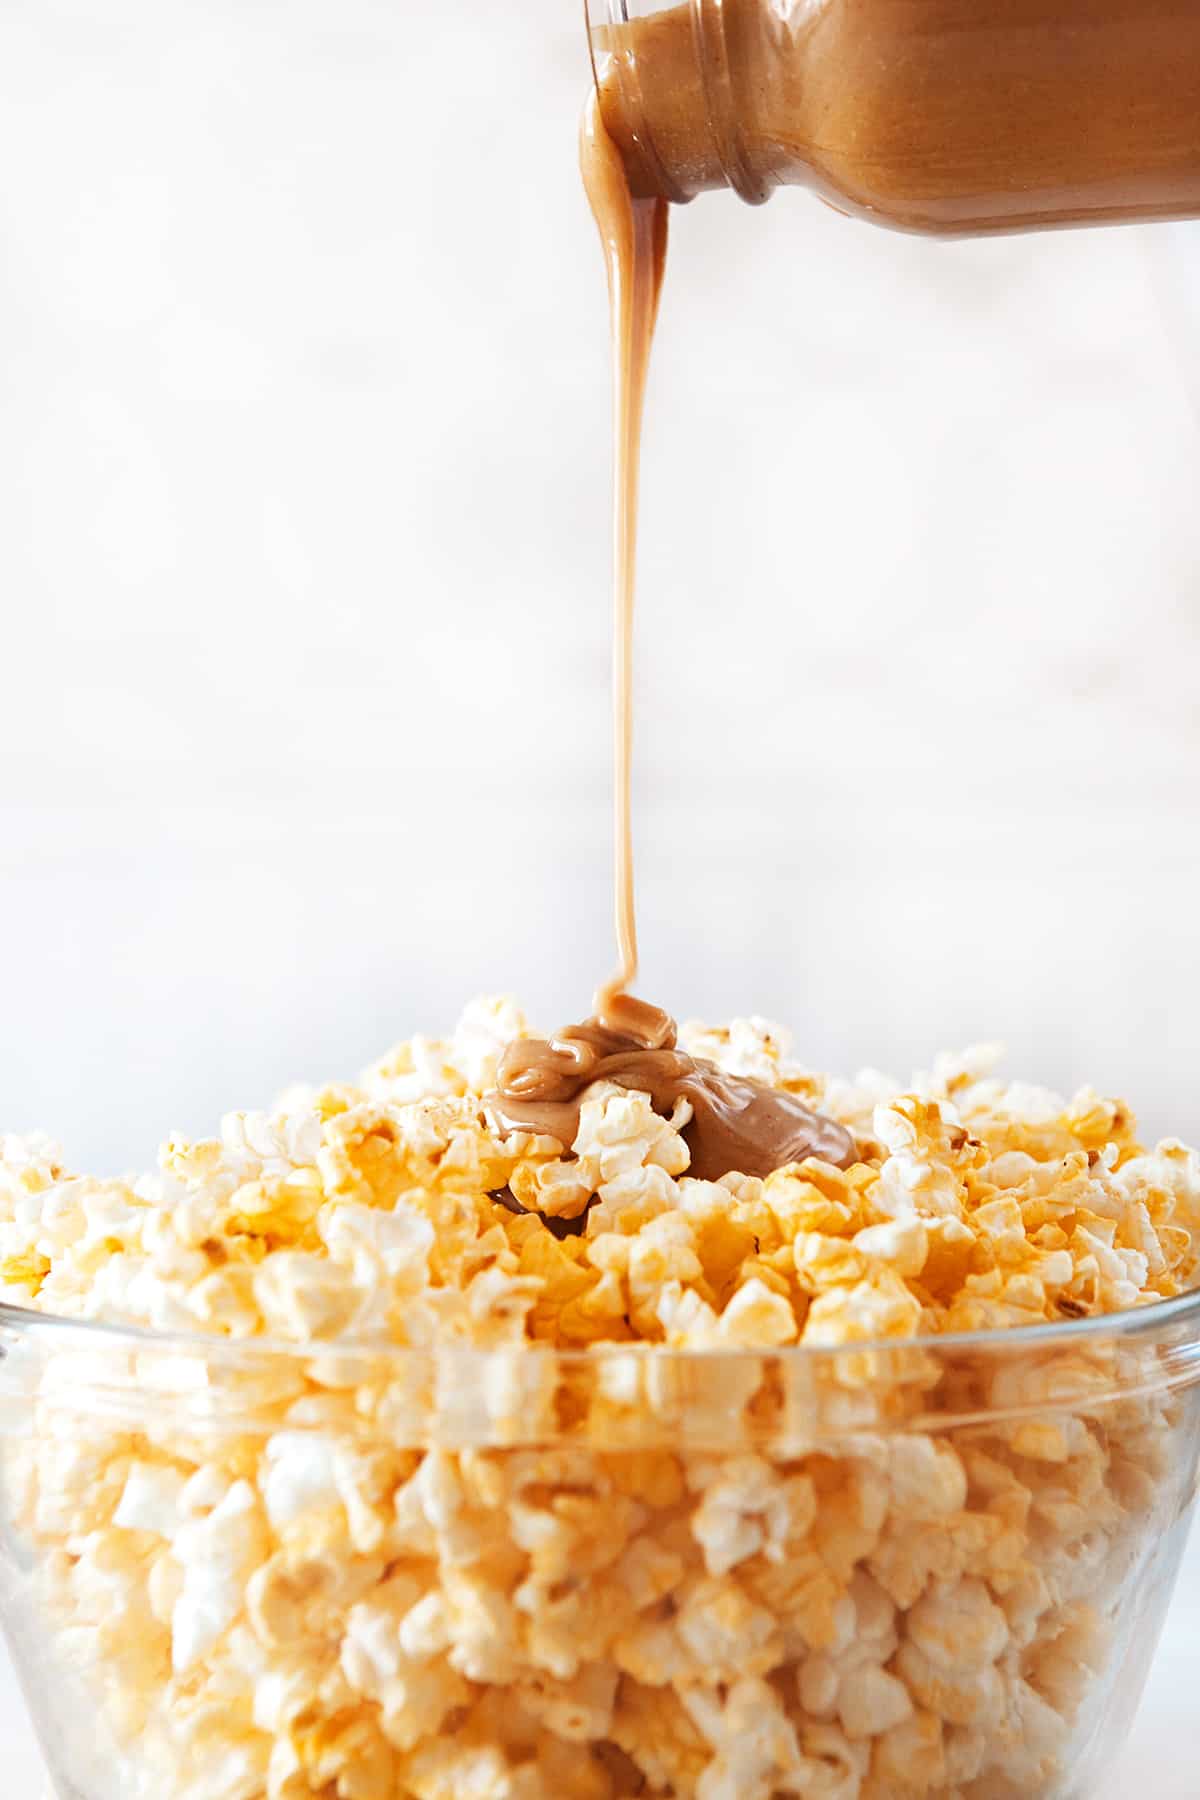 Pouring the sauce onto Peanut BUtter Popcorn.